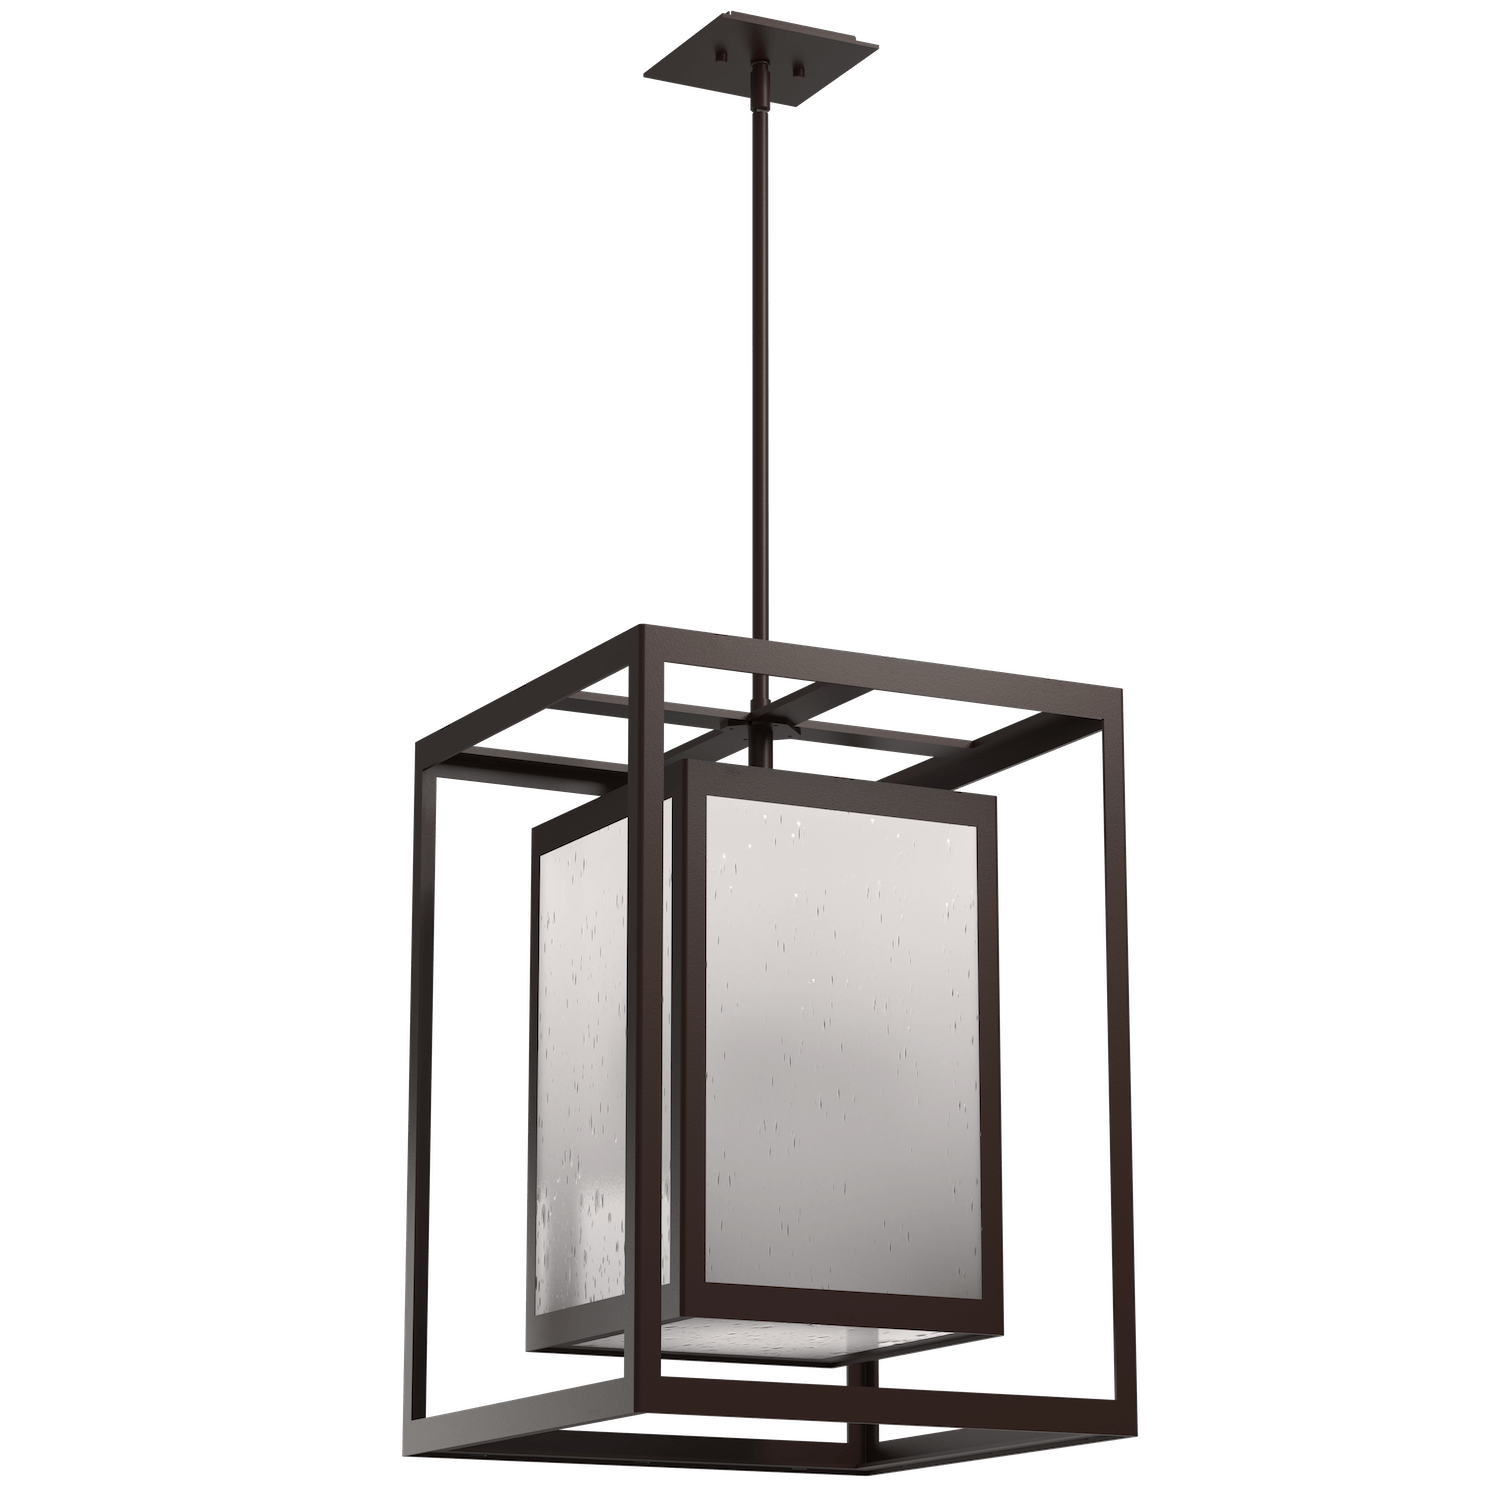 OPB0027-22-SB-FS-Hammerton-Studio-Double-Box-25-inch-outdoor-pendant-light-with-statuary-bronze-finish-and-frosted-glass-shade-and-LED-lamping